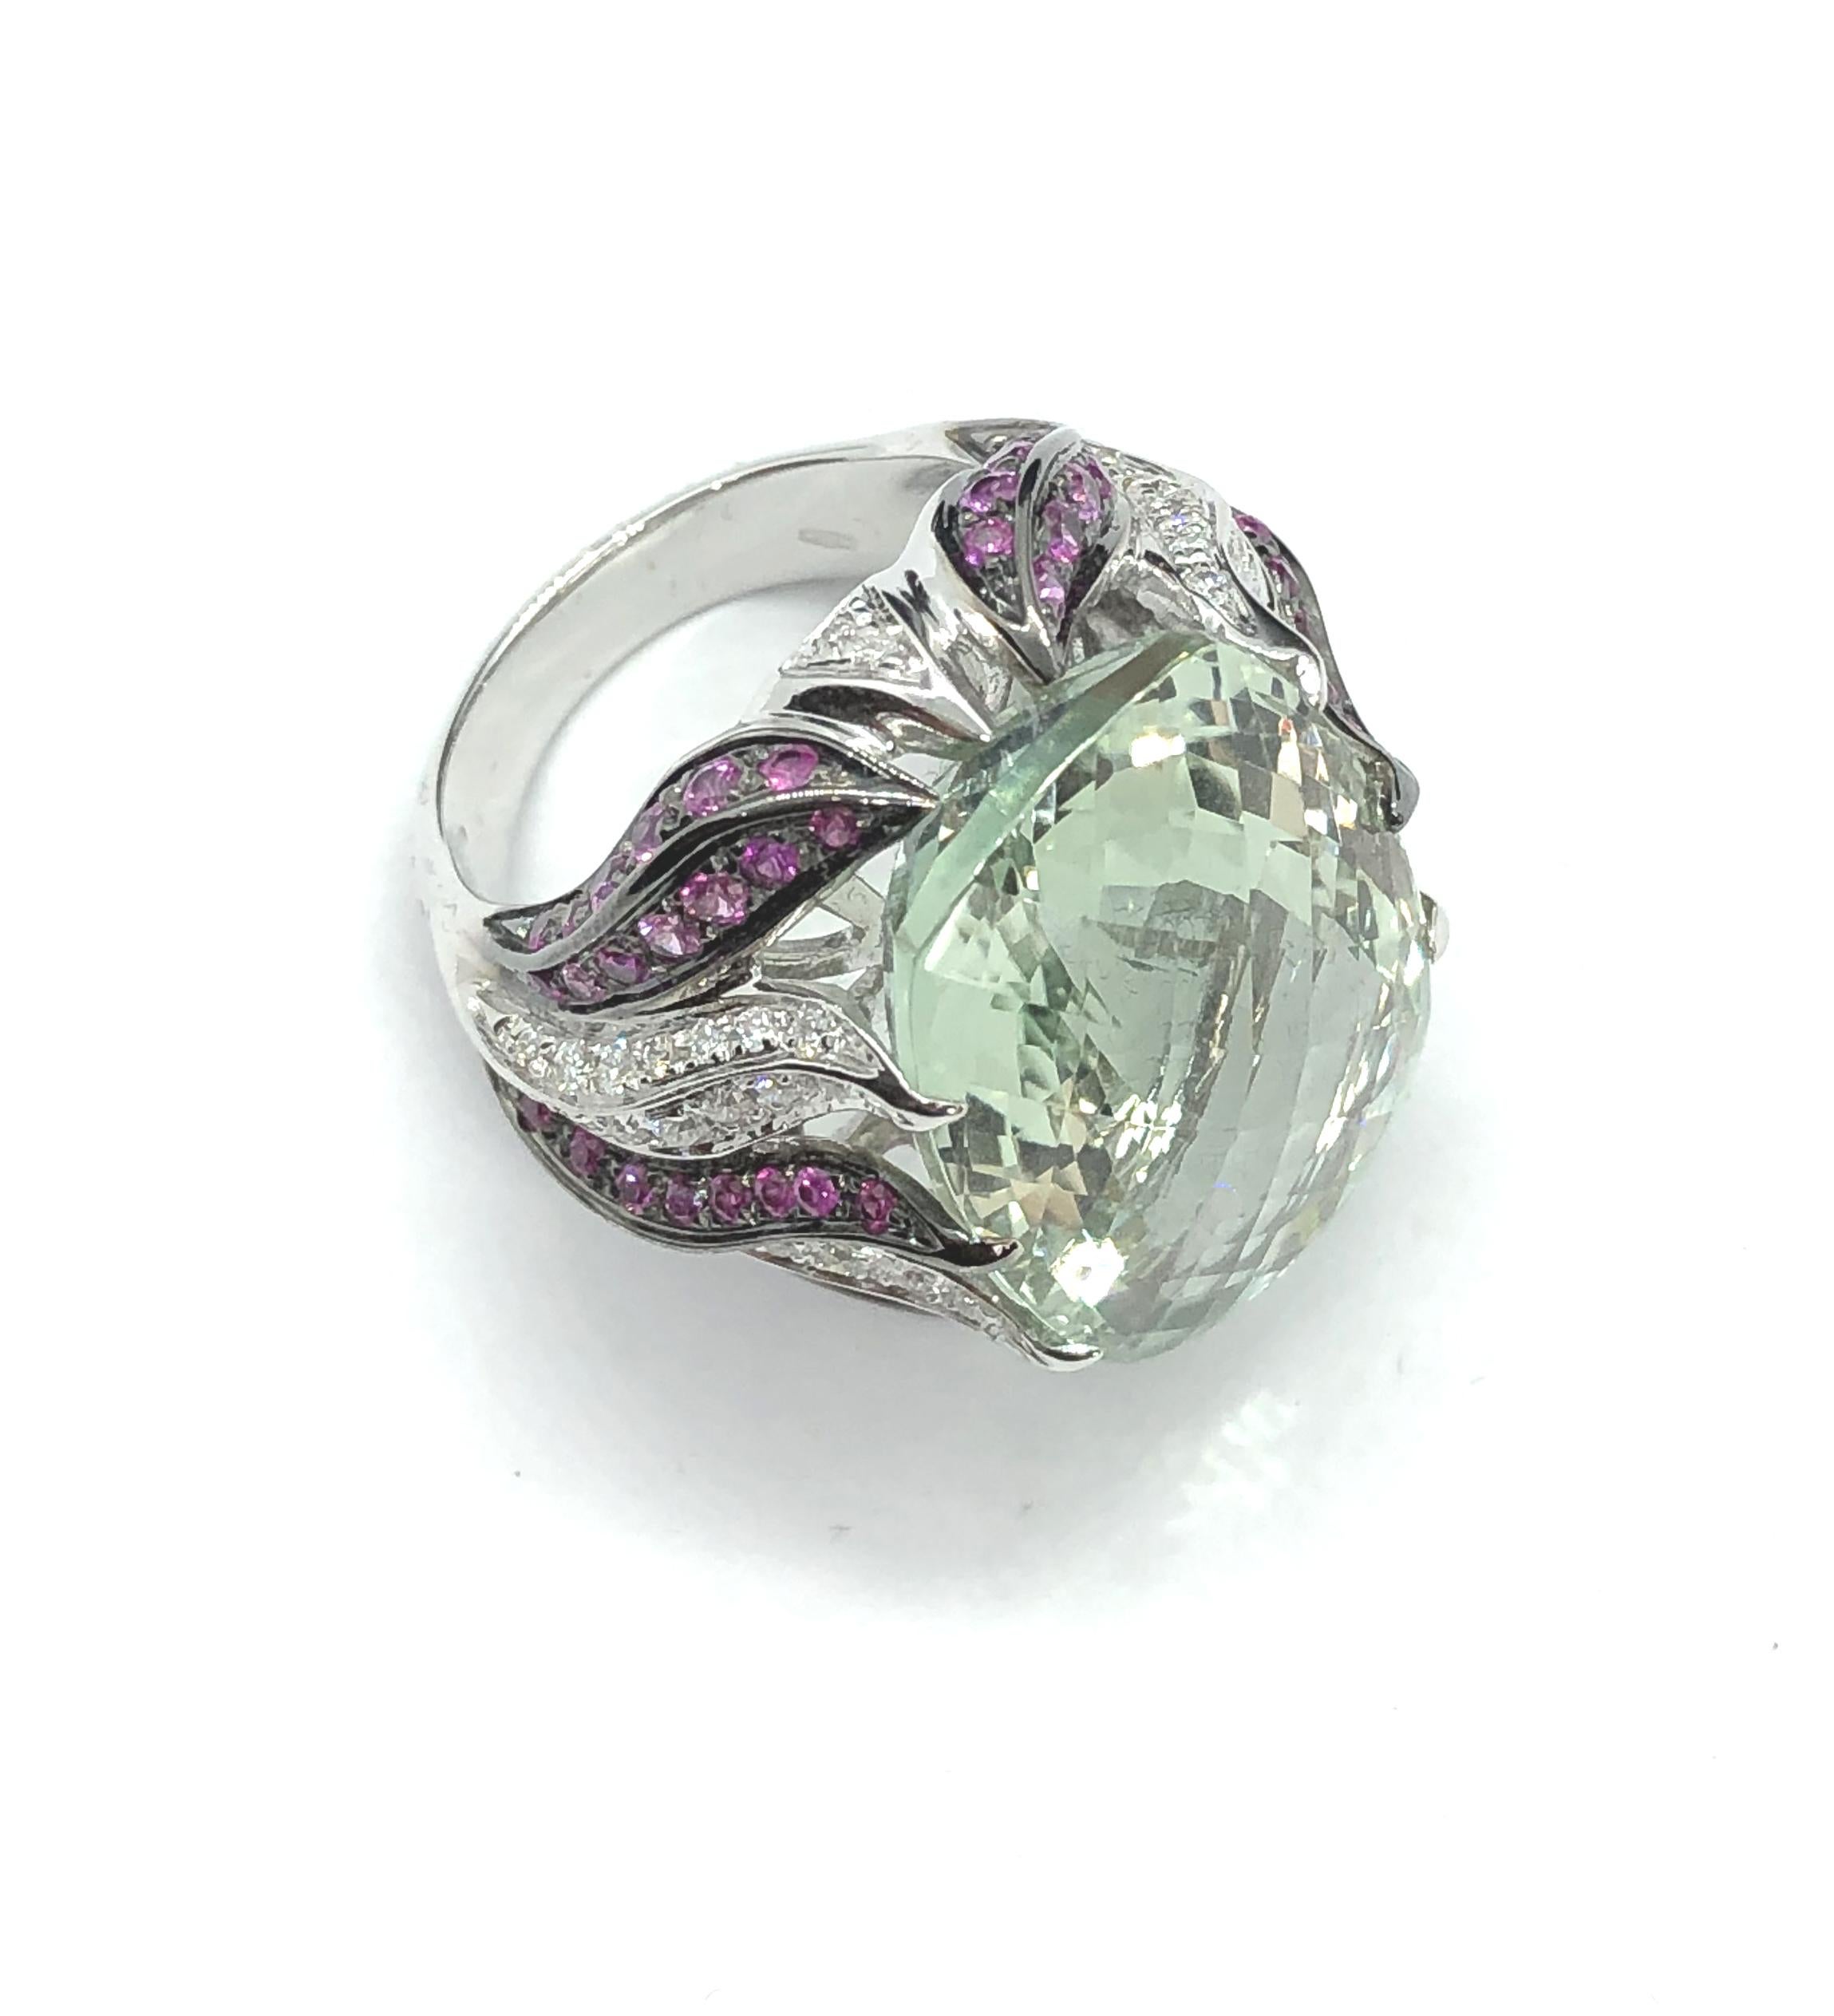 23 Ct Green Prasiolite White Gold Cocktail Ring Diamond and Pink Sapphires Flame For Sale 1